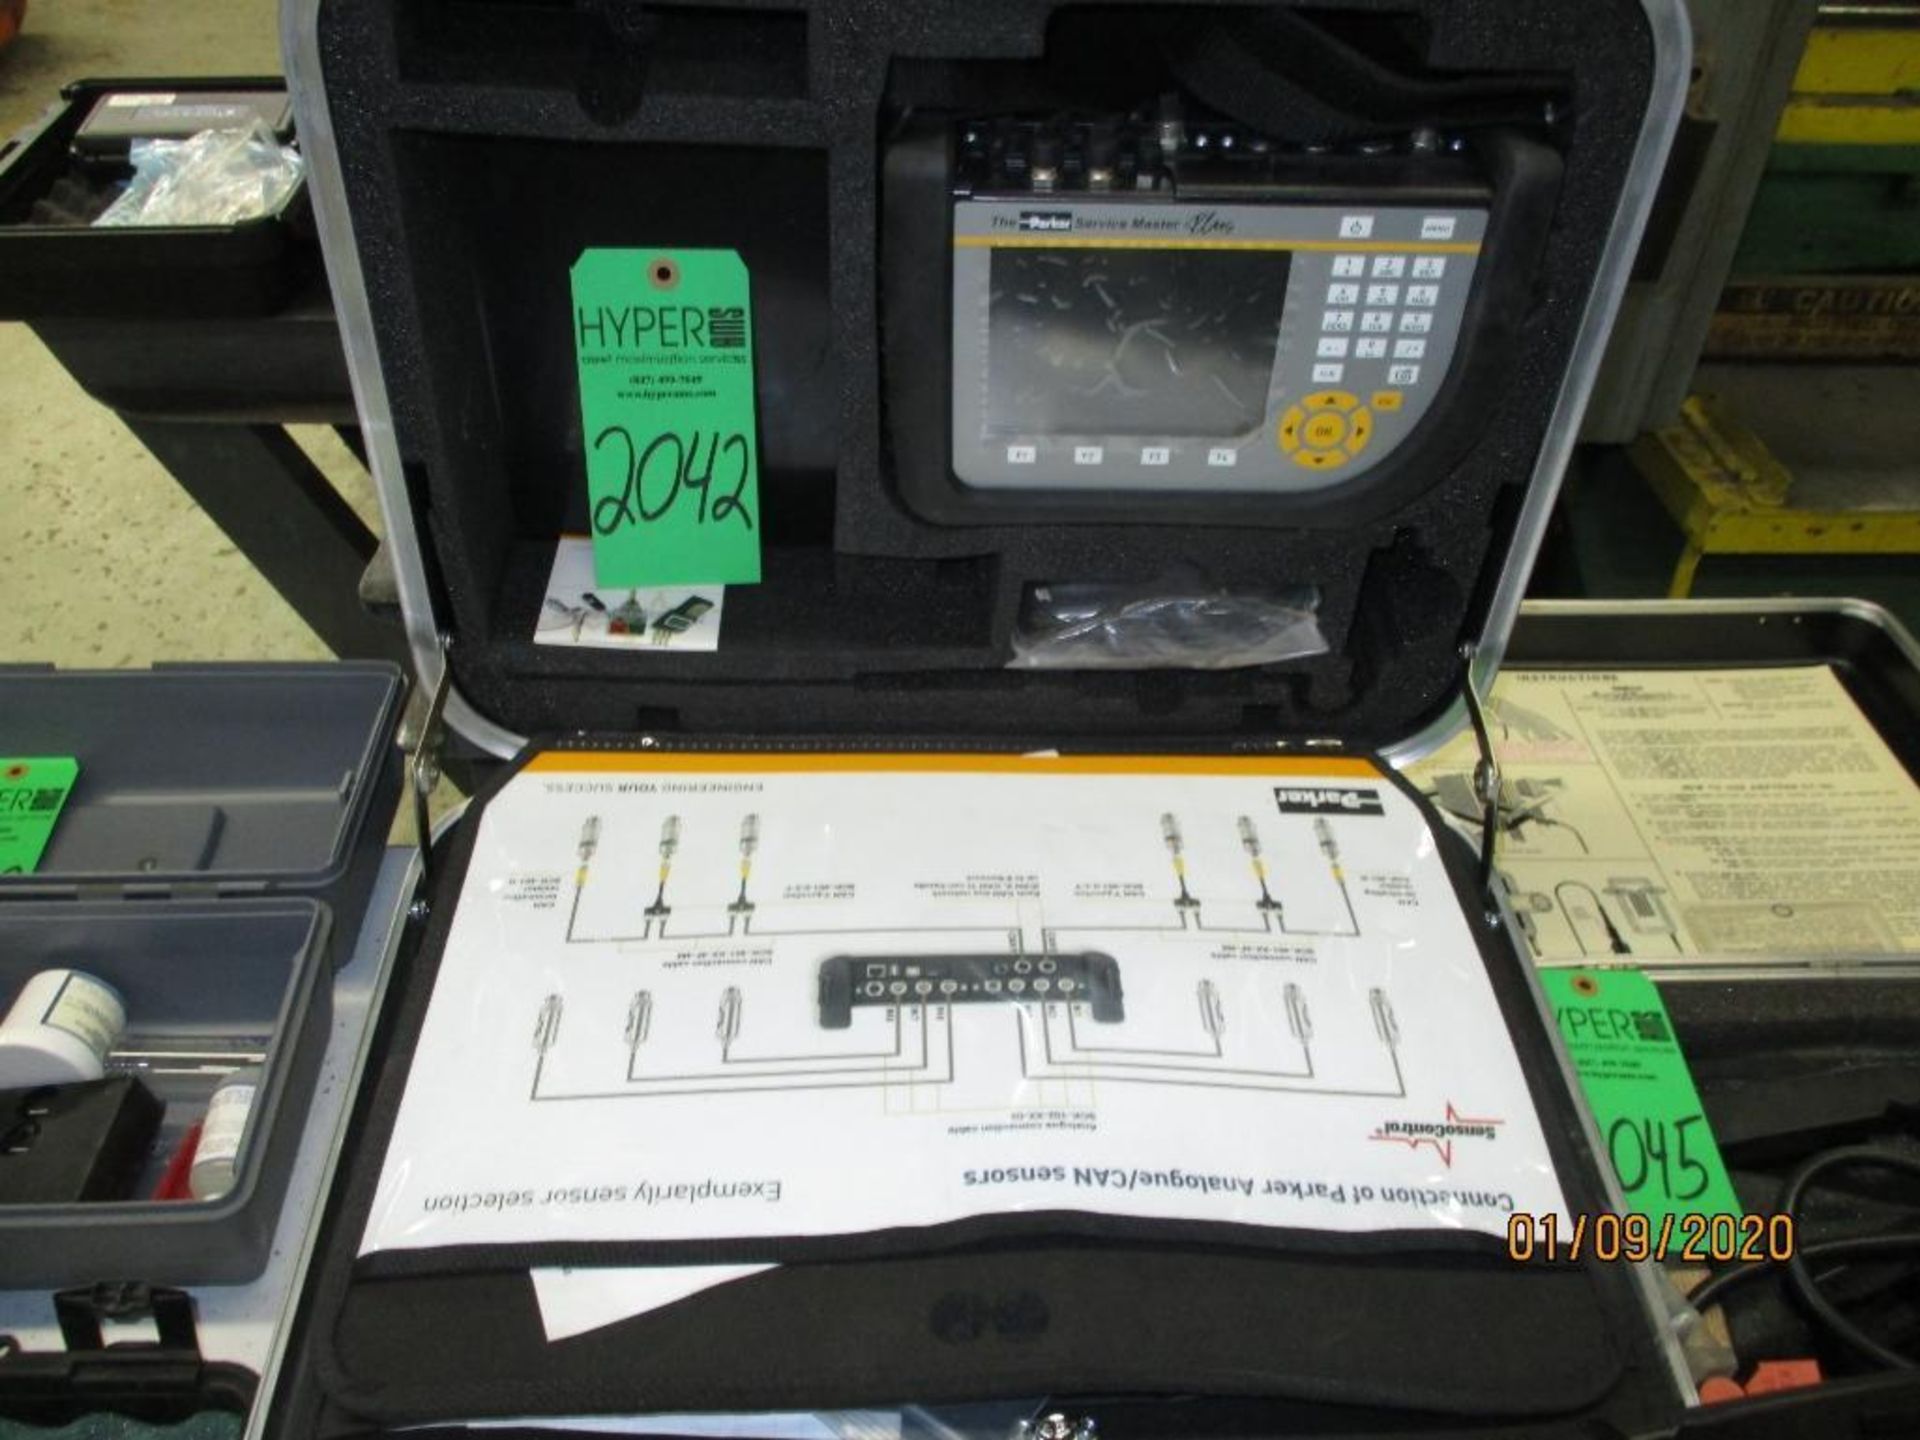 Parker Service Master Plus Pneumatic/Hydrulic Measuring And Analyzing Tool